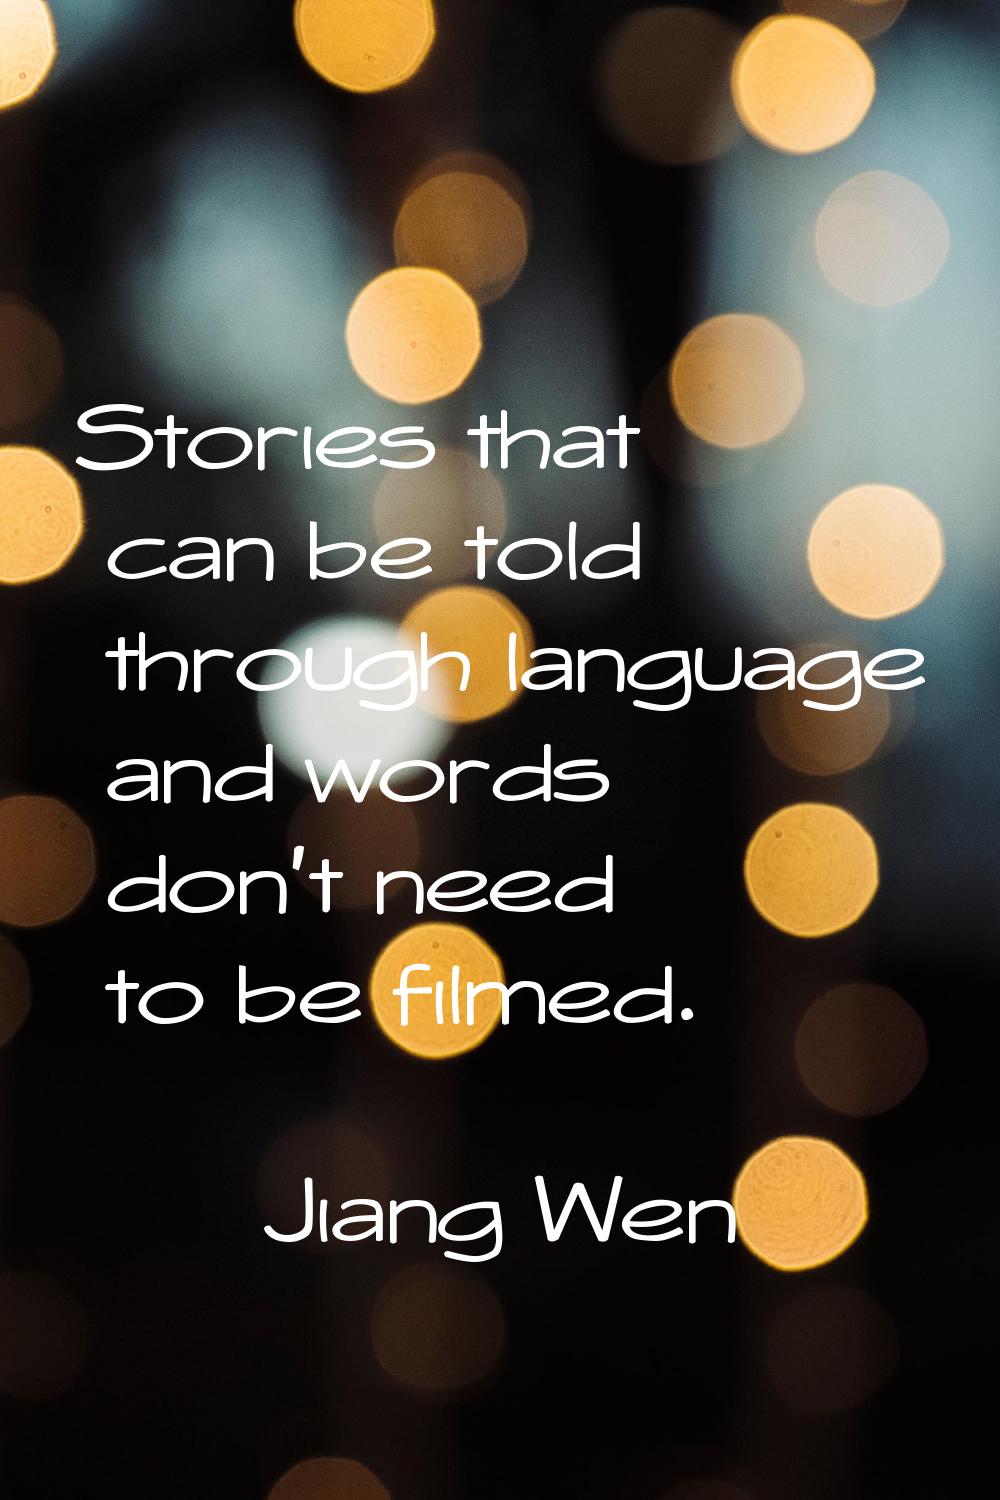 Stories that can be told through language and words don't need to be filmed.